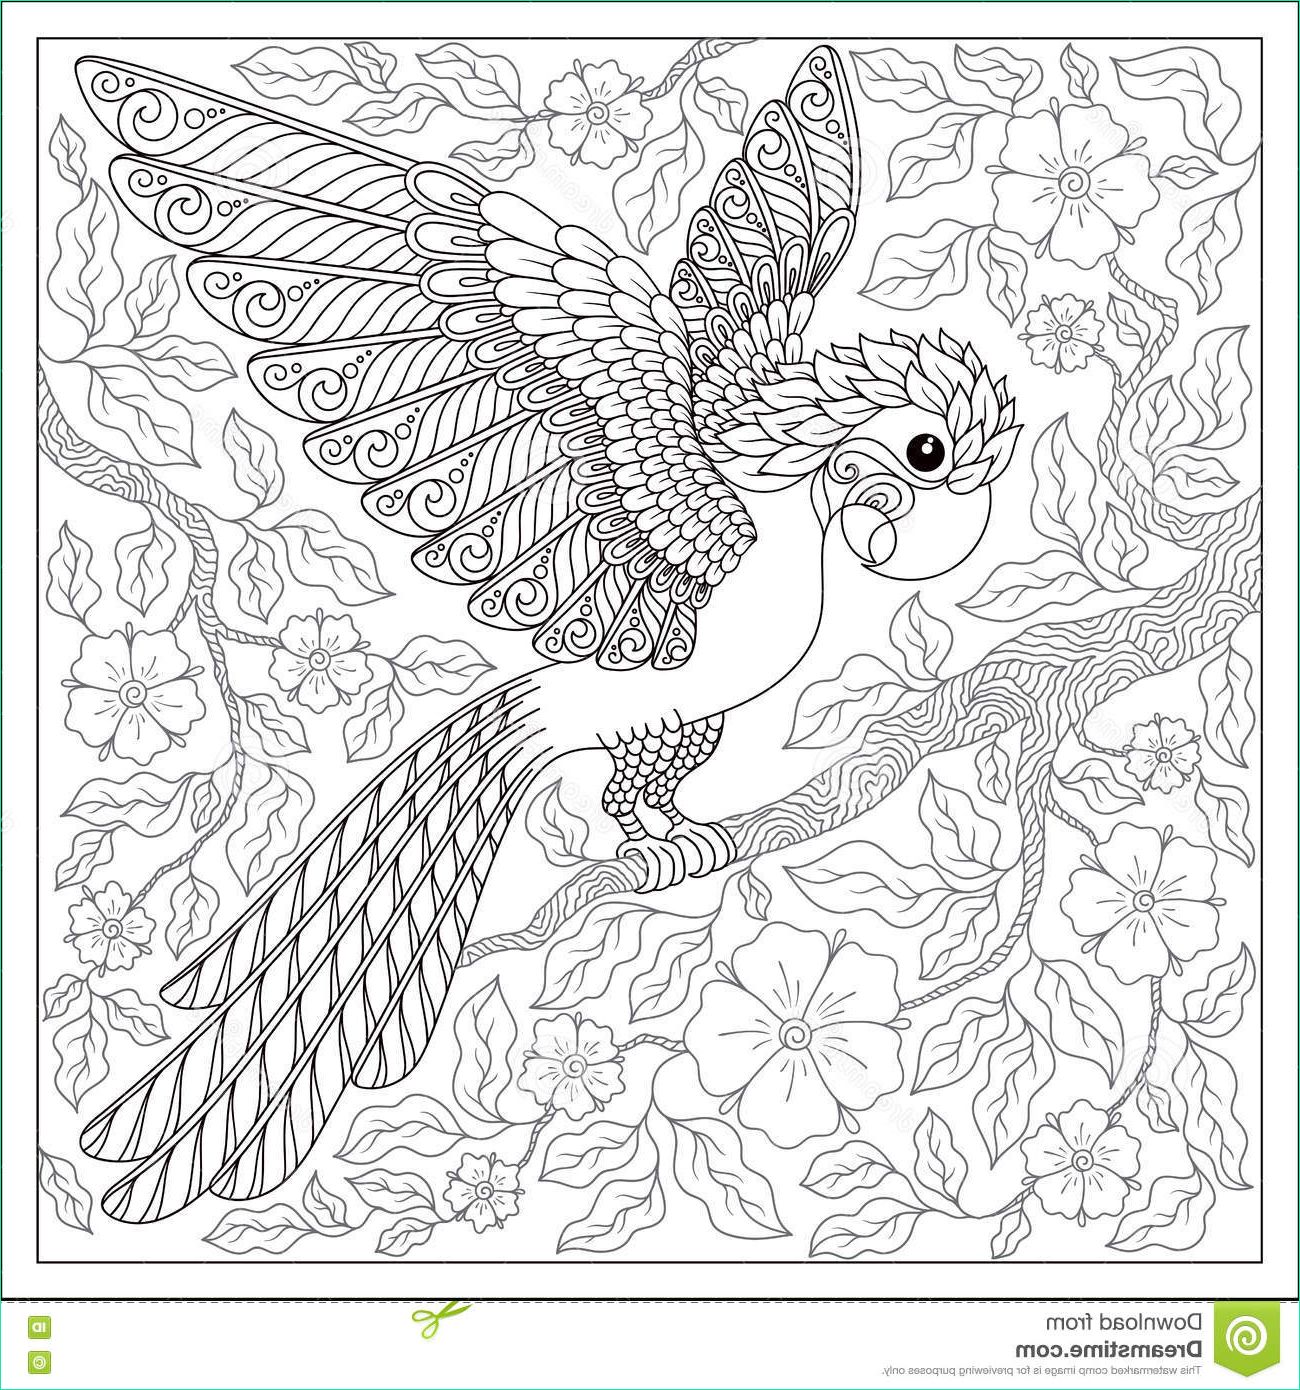 stock illustration exotic bird fantastic flowers branches leaves set illustra contour thin line drawing vector fantasy stylized cockatoo jungle image